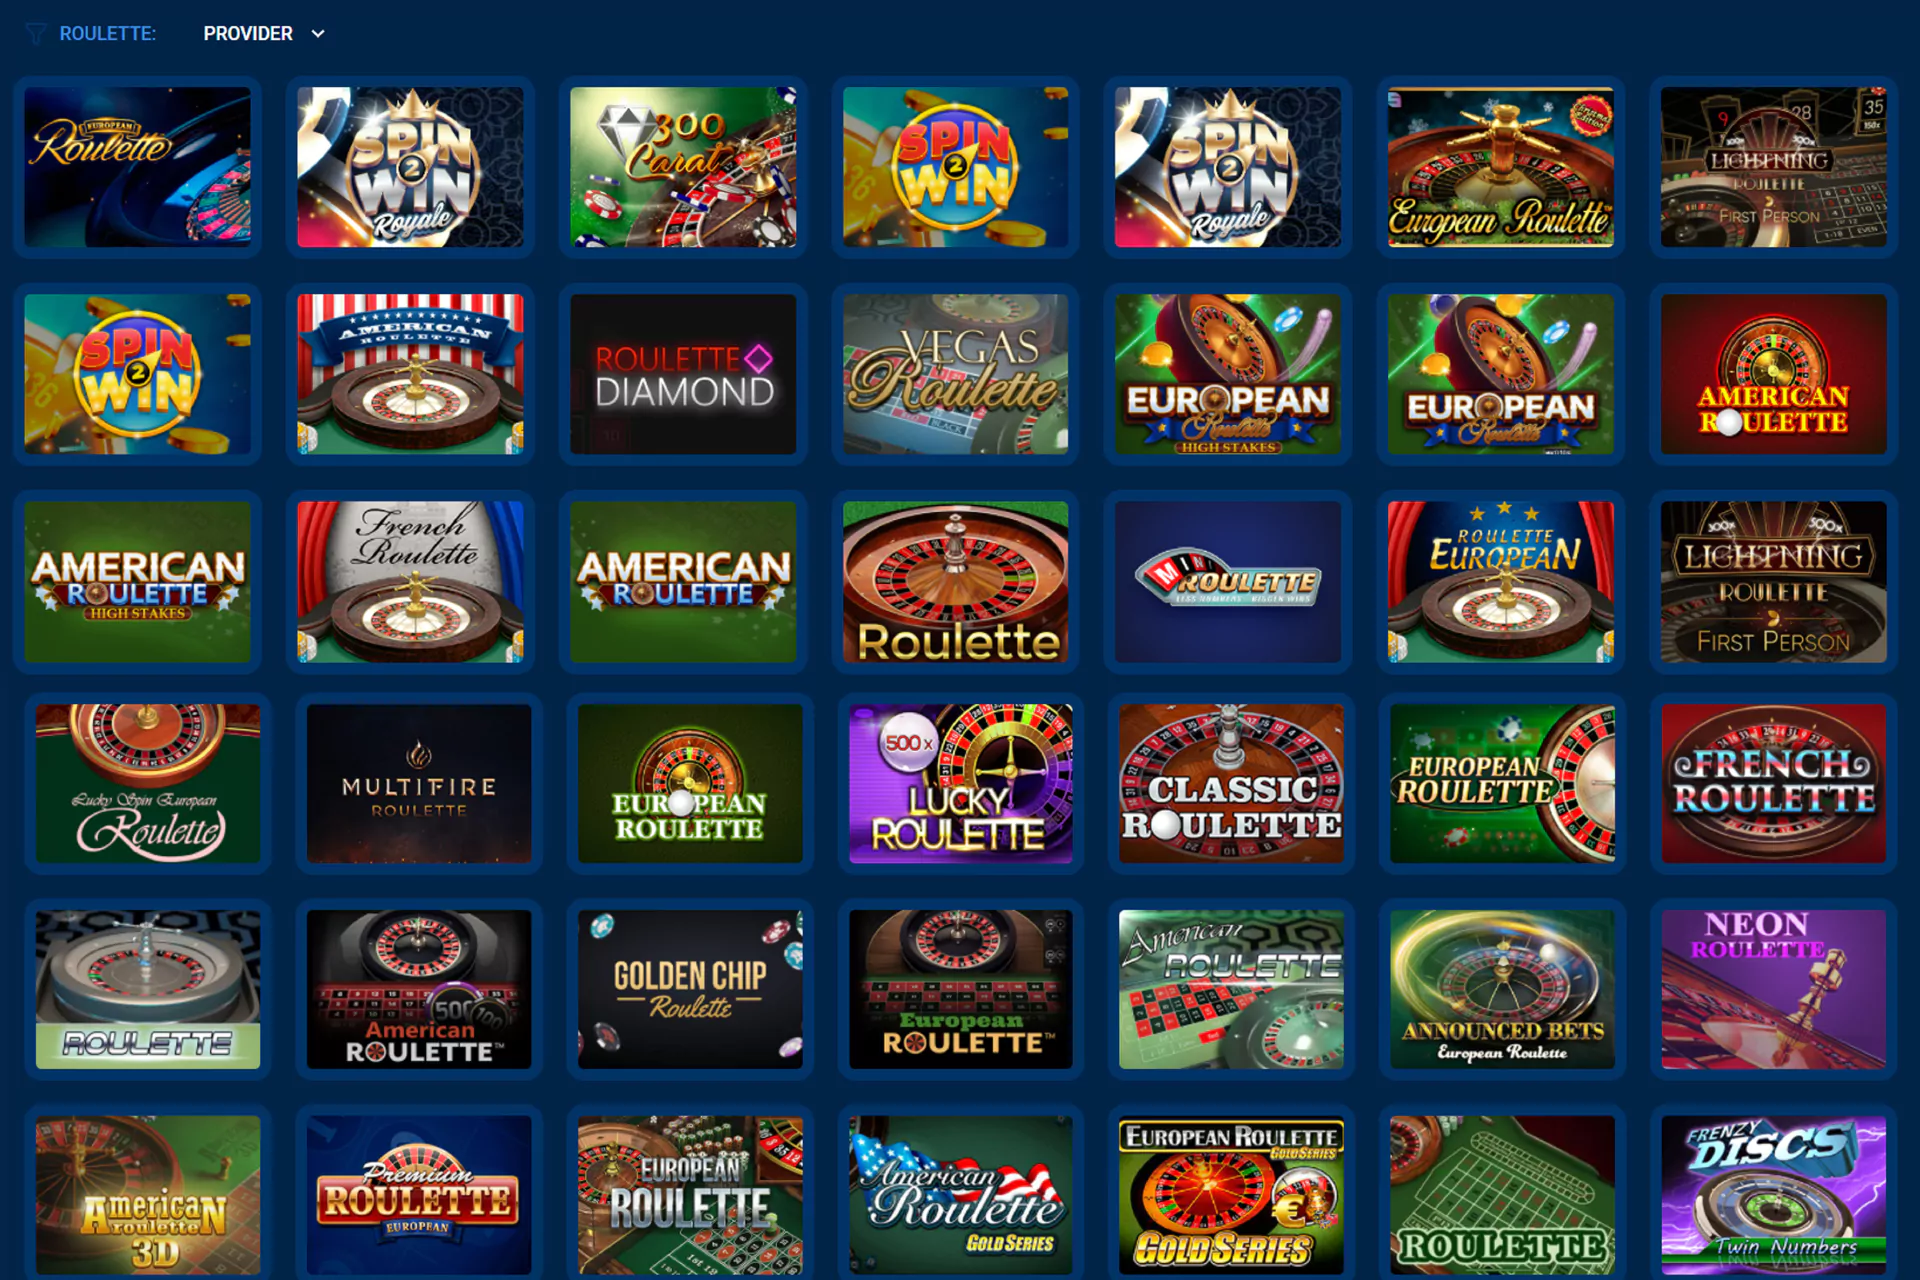 There are plenty of roulette variants in the Mostbet casino.